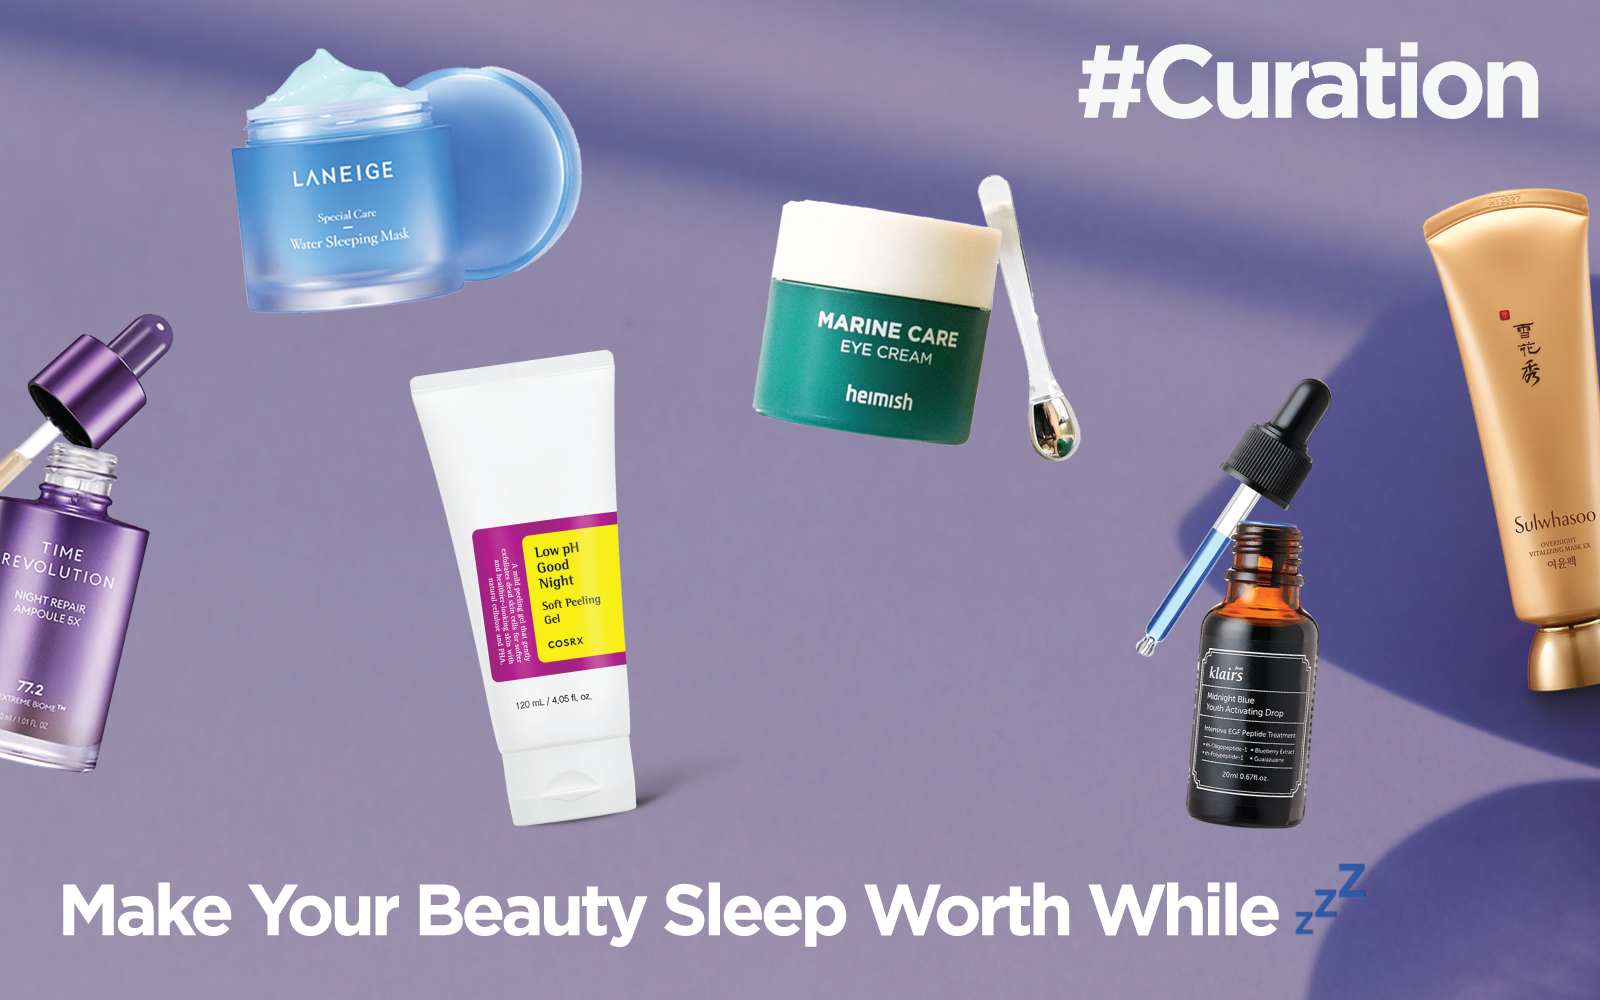 #Curation: Make Your Beauty Sleep Worth While